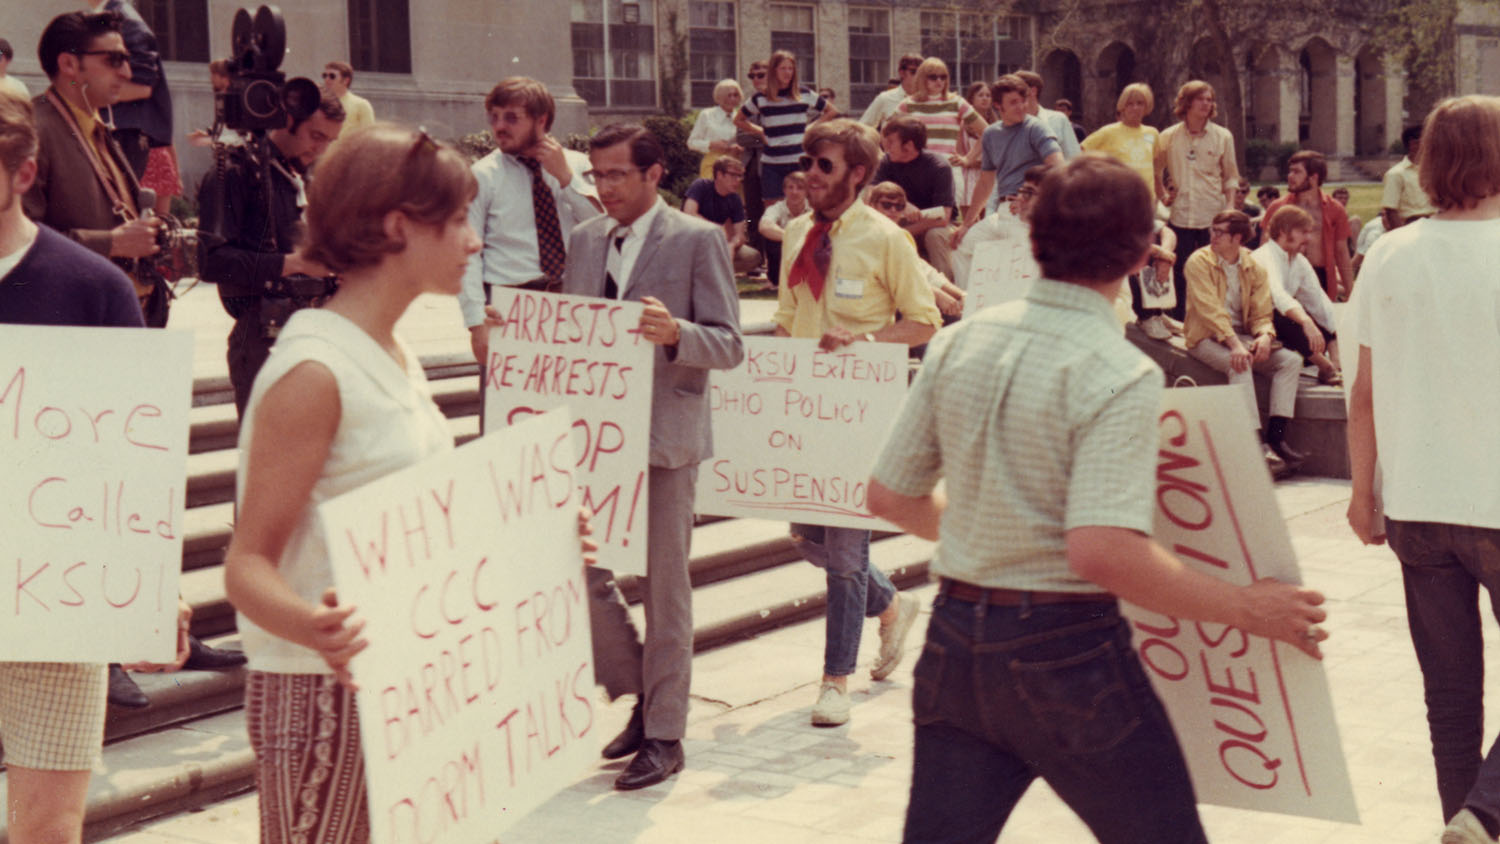 Explore the Kent State Shootings Digital Archive (photo by Bill Greiner, May 1969)